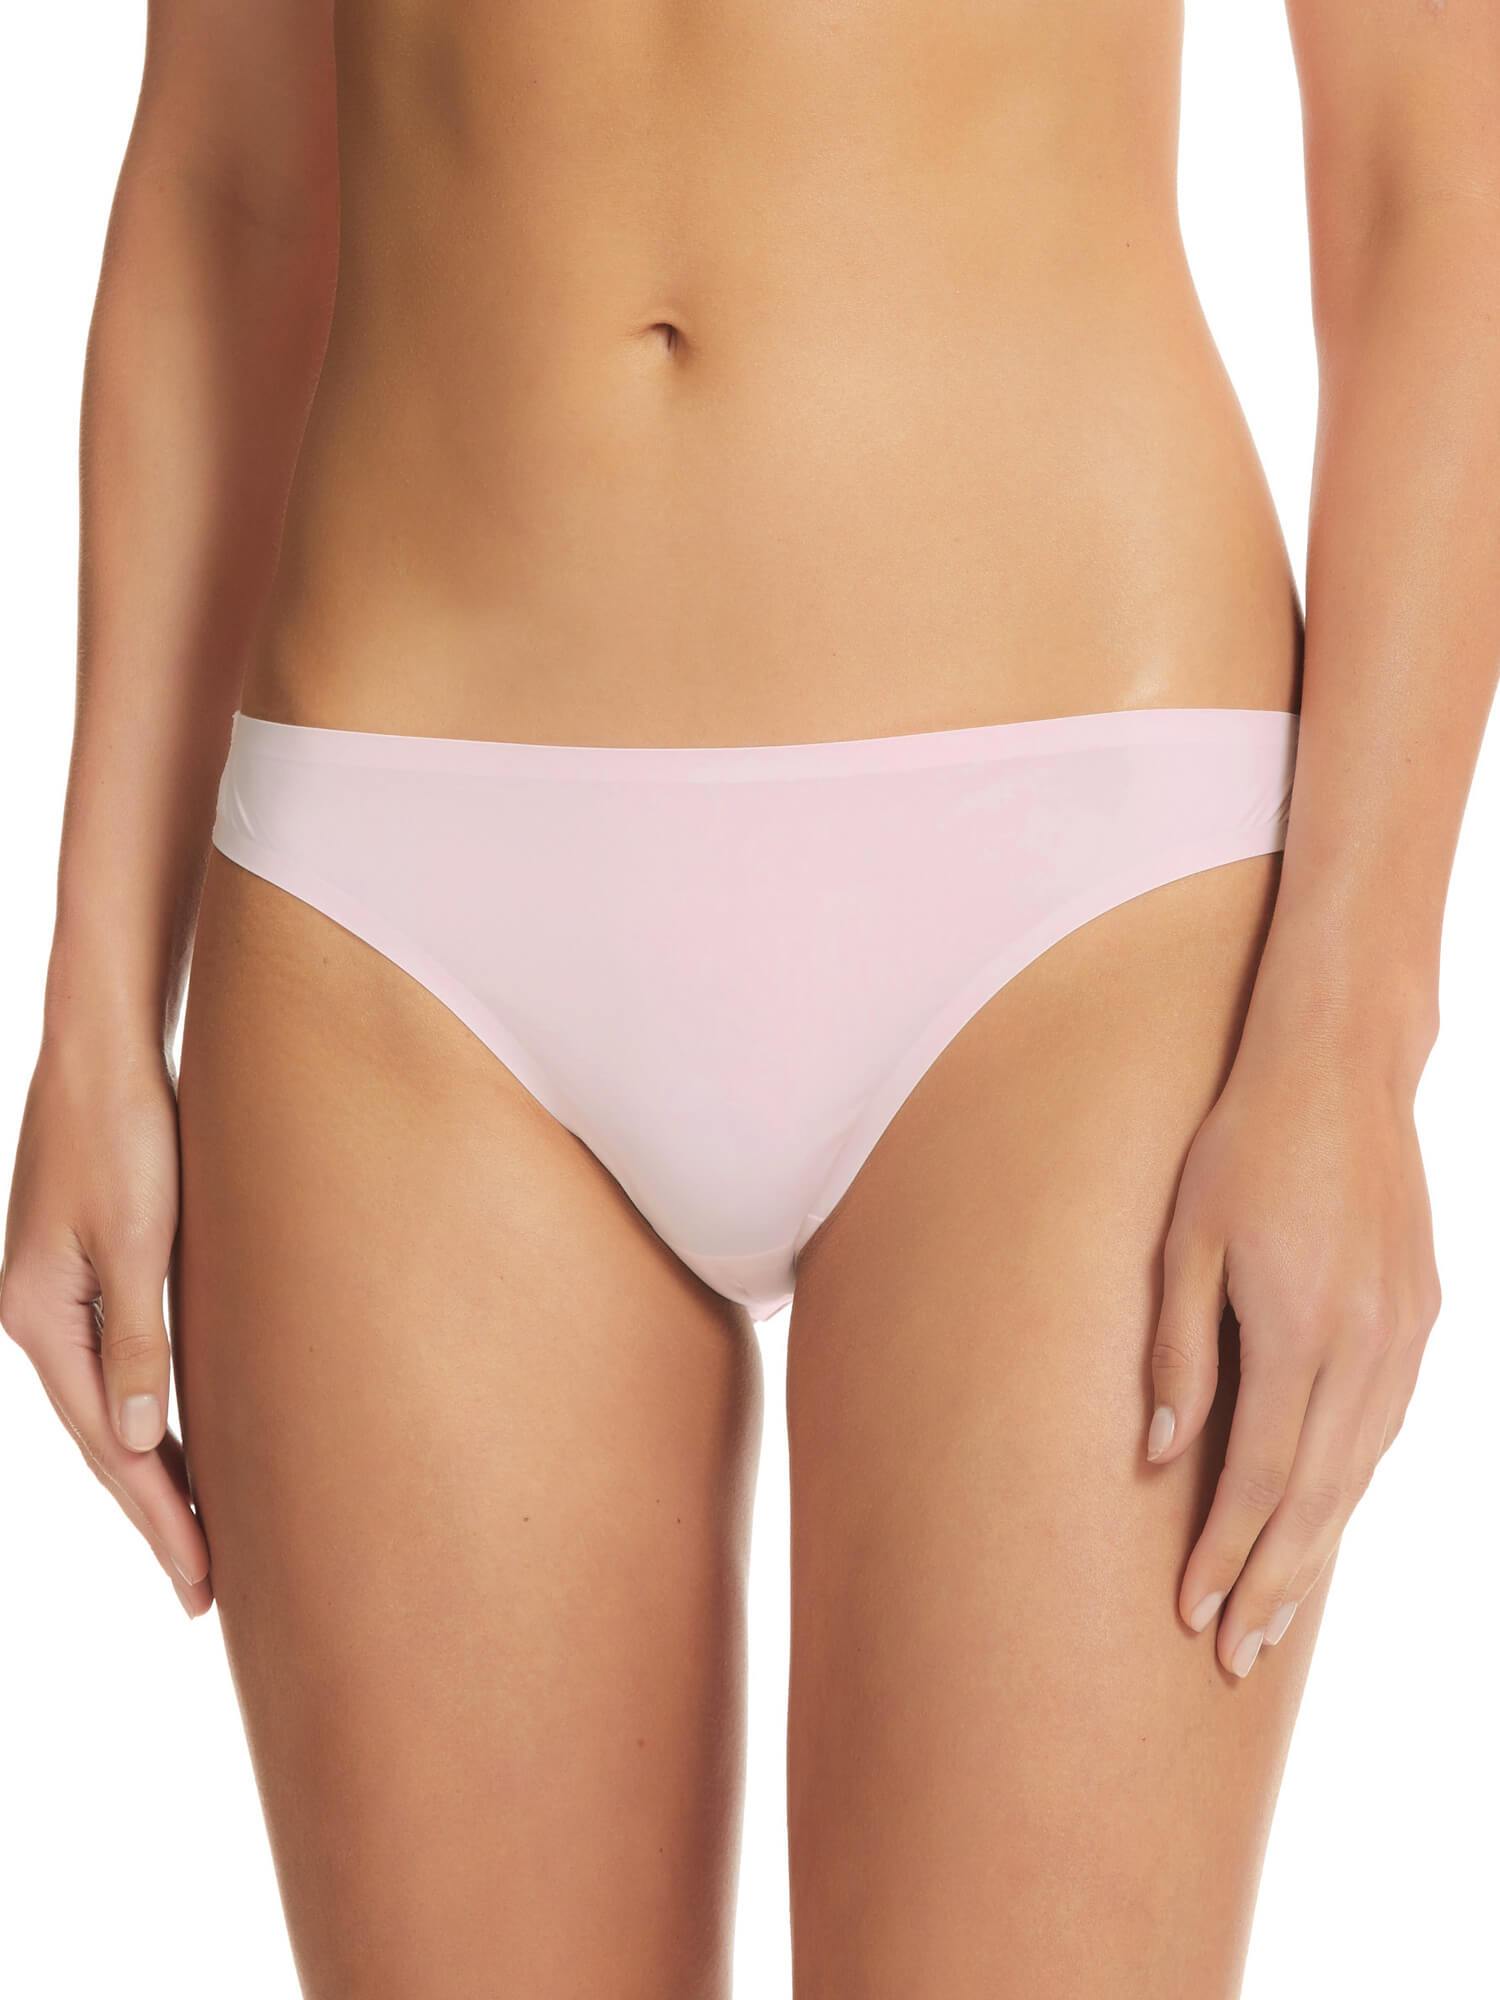 Fine lines Underline Elevate Brazilian NB042 - Briefs Shell / 10 / S  Available at Illusions Lingerie